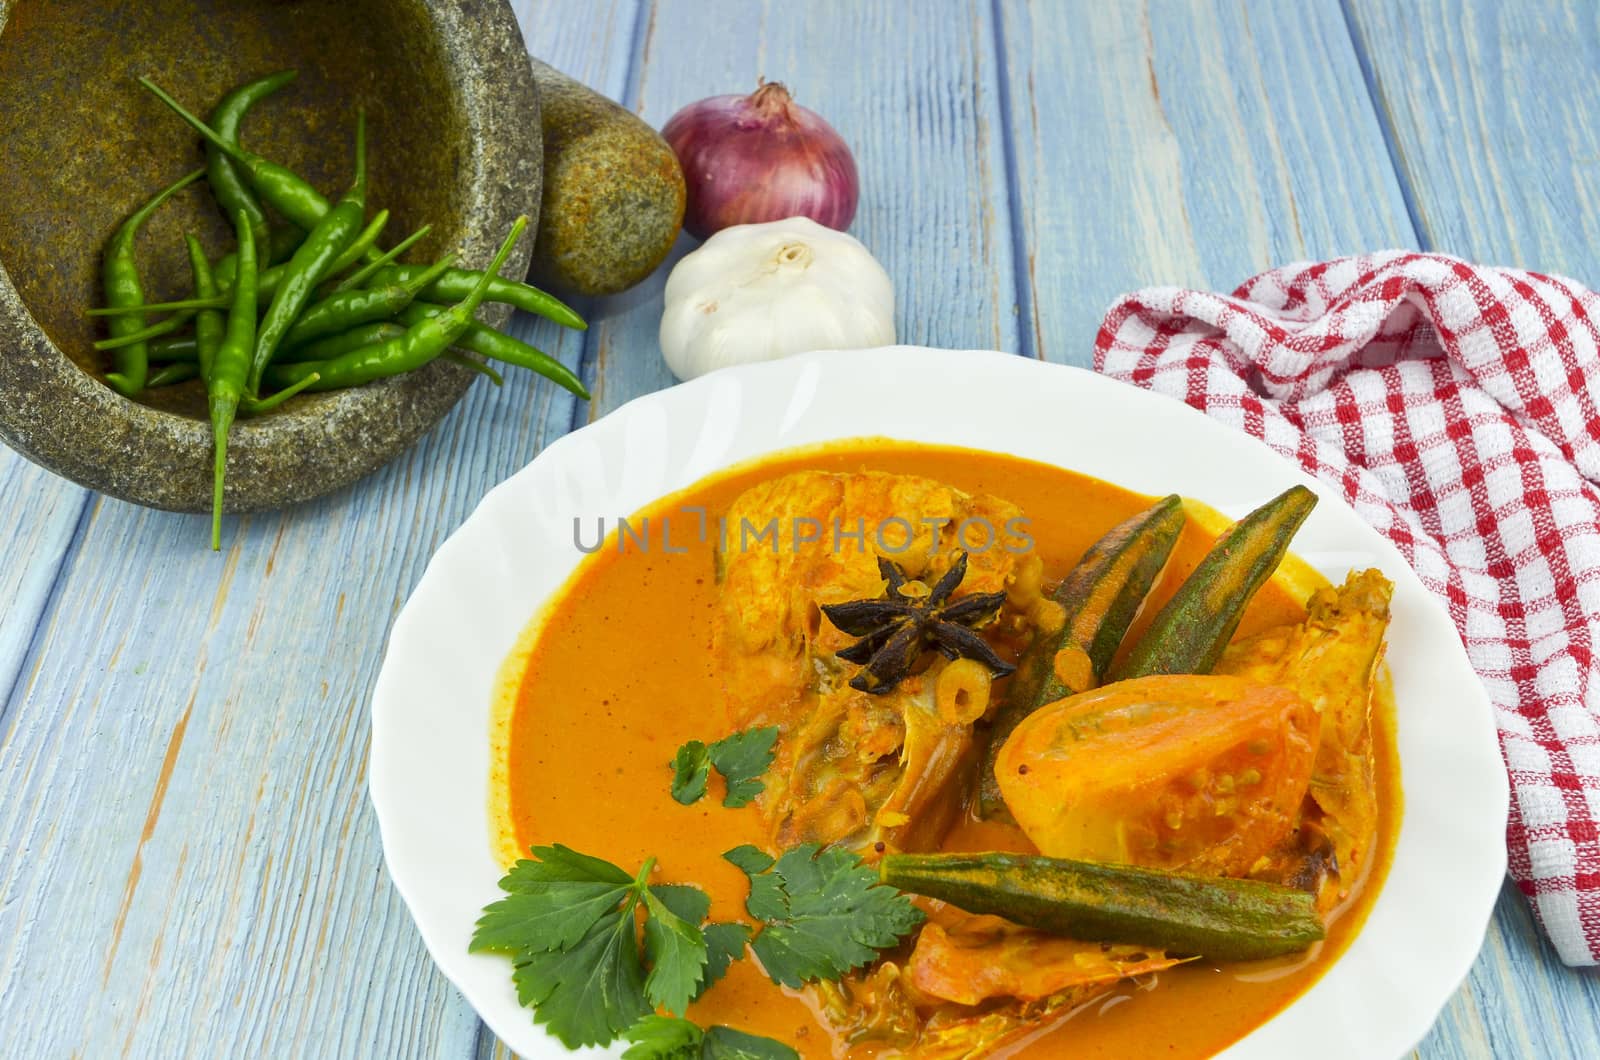 Spicy and tasty fish curry dish, Traditional Malaysian cuisine. Selective focus.